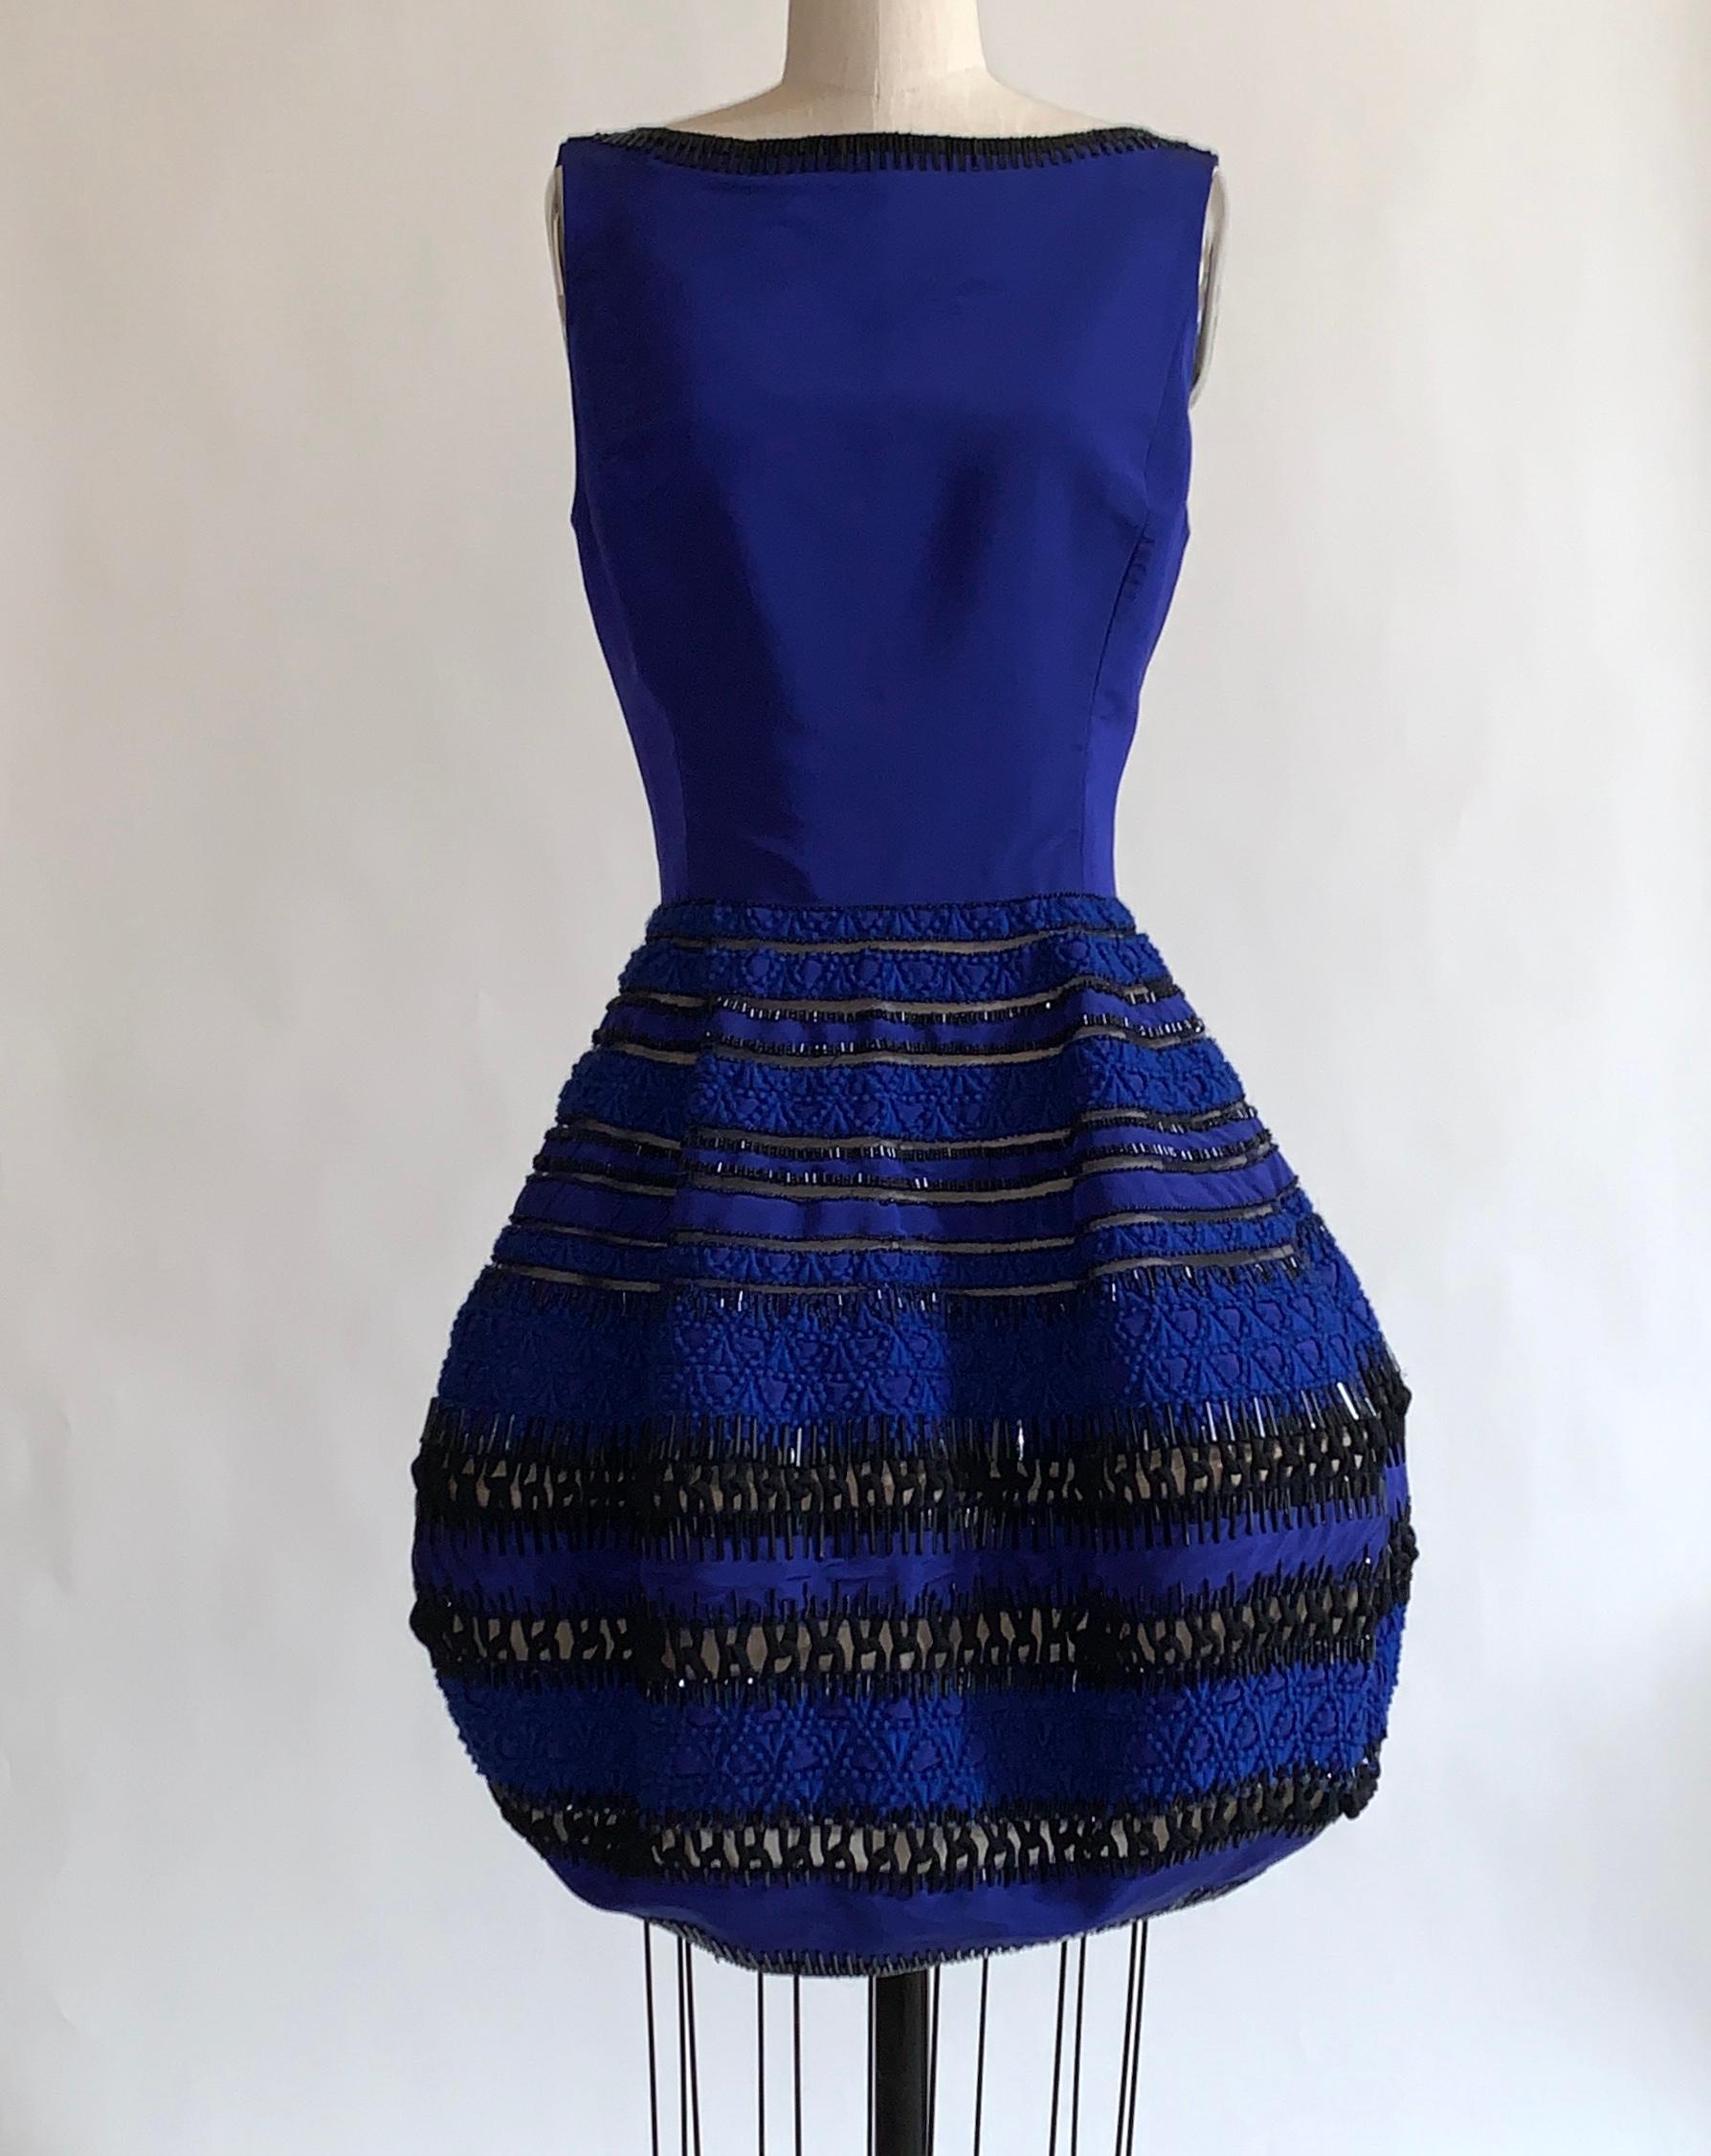 Oscar de la Renta cobalt blue silk dress with embellished skirt. Beading at neckline and throughout skirt. Blue embroidery detail and black ornamental cording at skirt. Back zip. 

100% silk. 
Lined in 100% nylon.

Size US 6, may run small, see